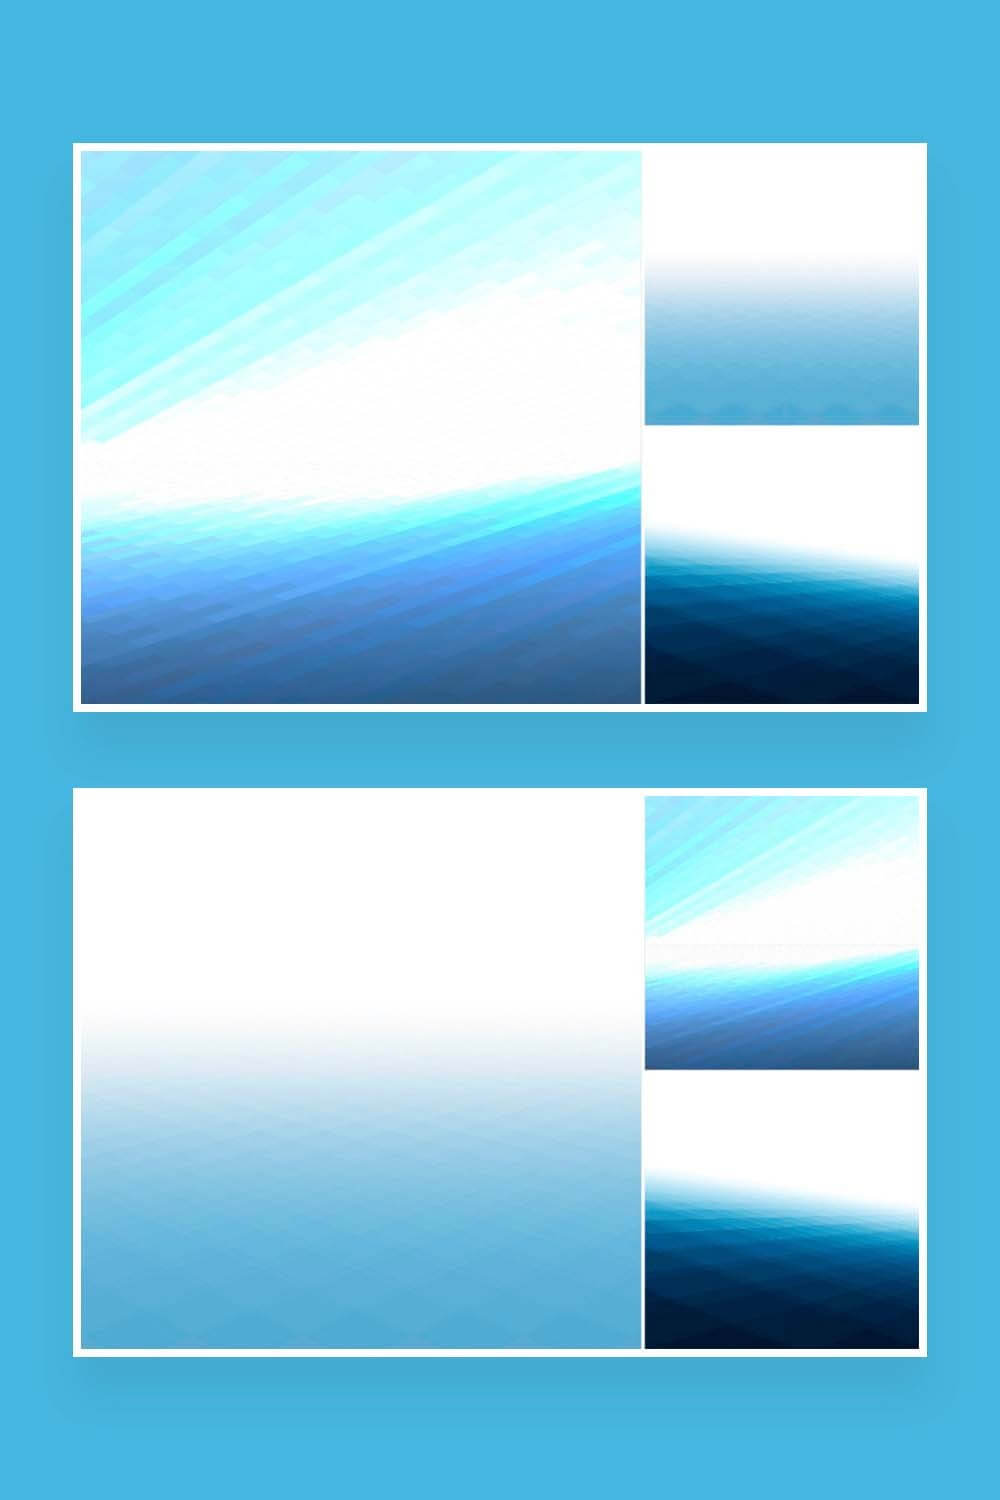 Two pictures in one - abstract backgrounds with blue perspective.